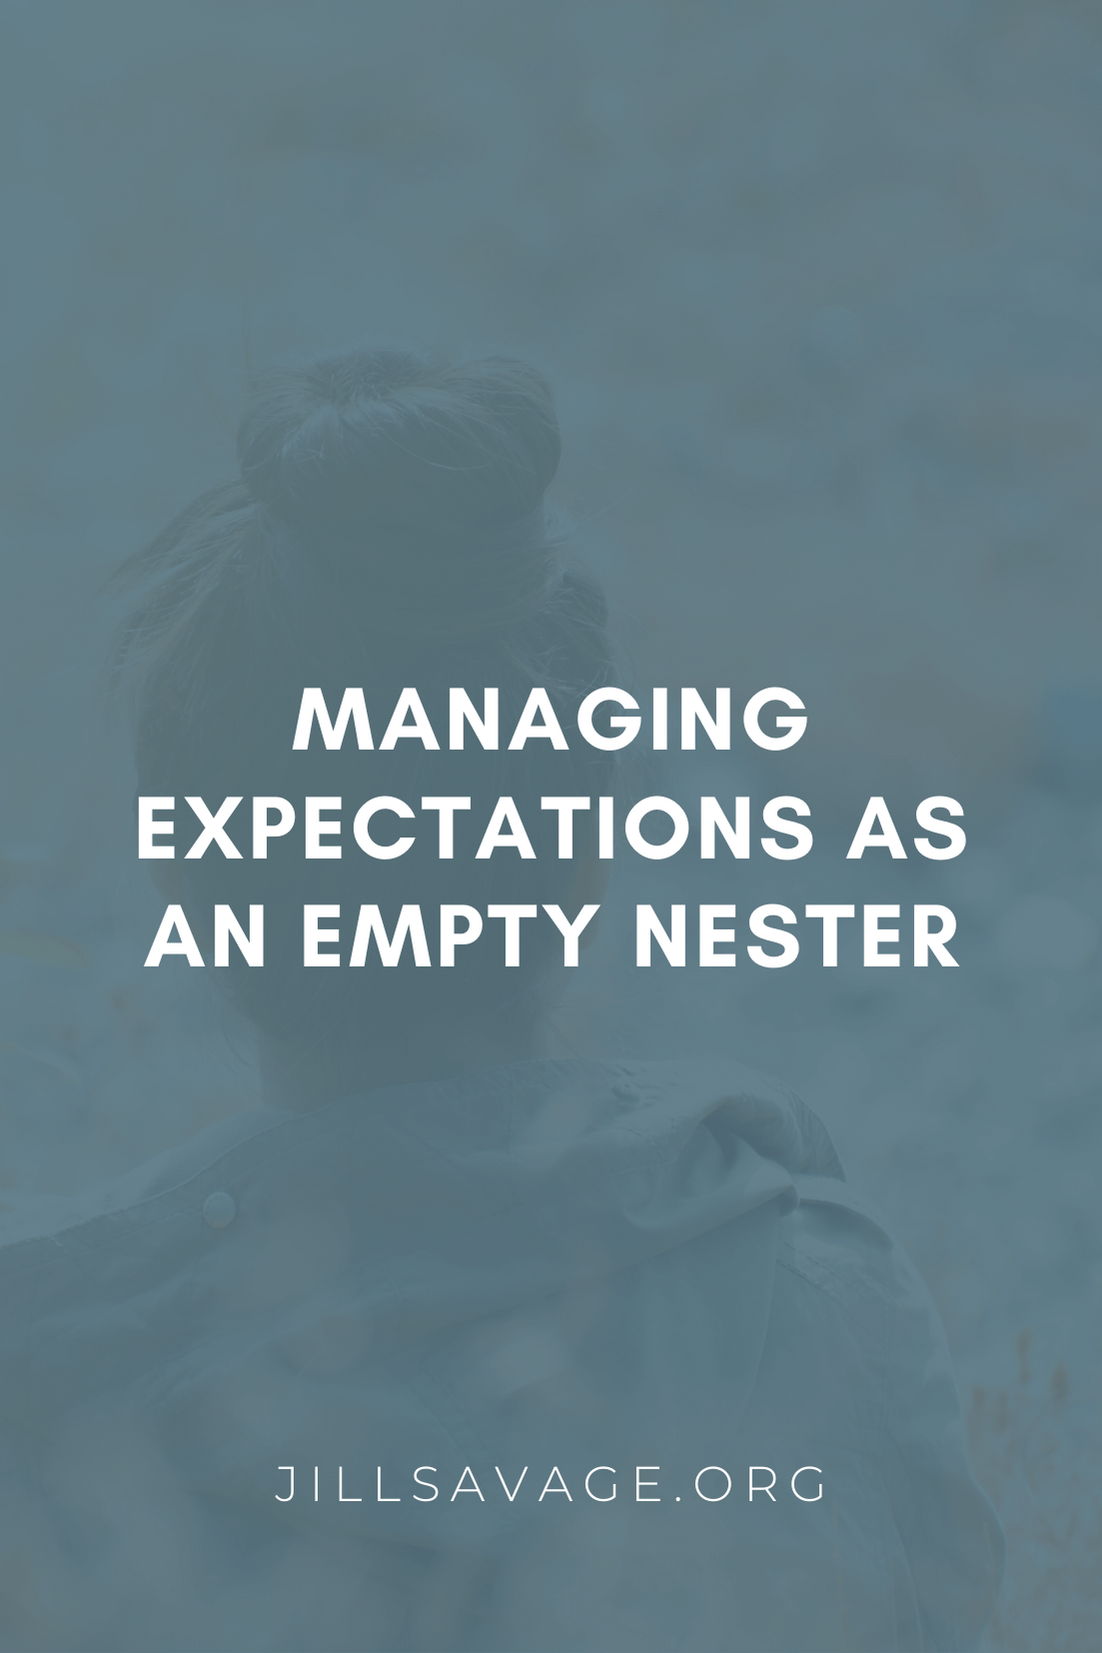 Managing Expectations as an Empty Nester